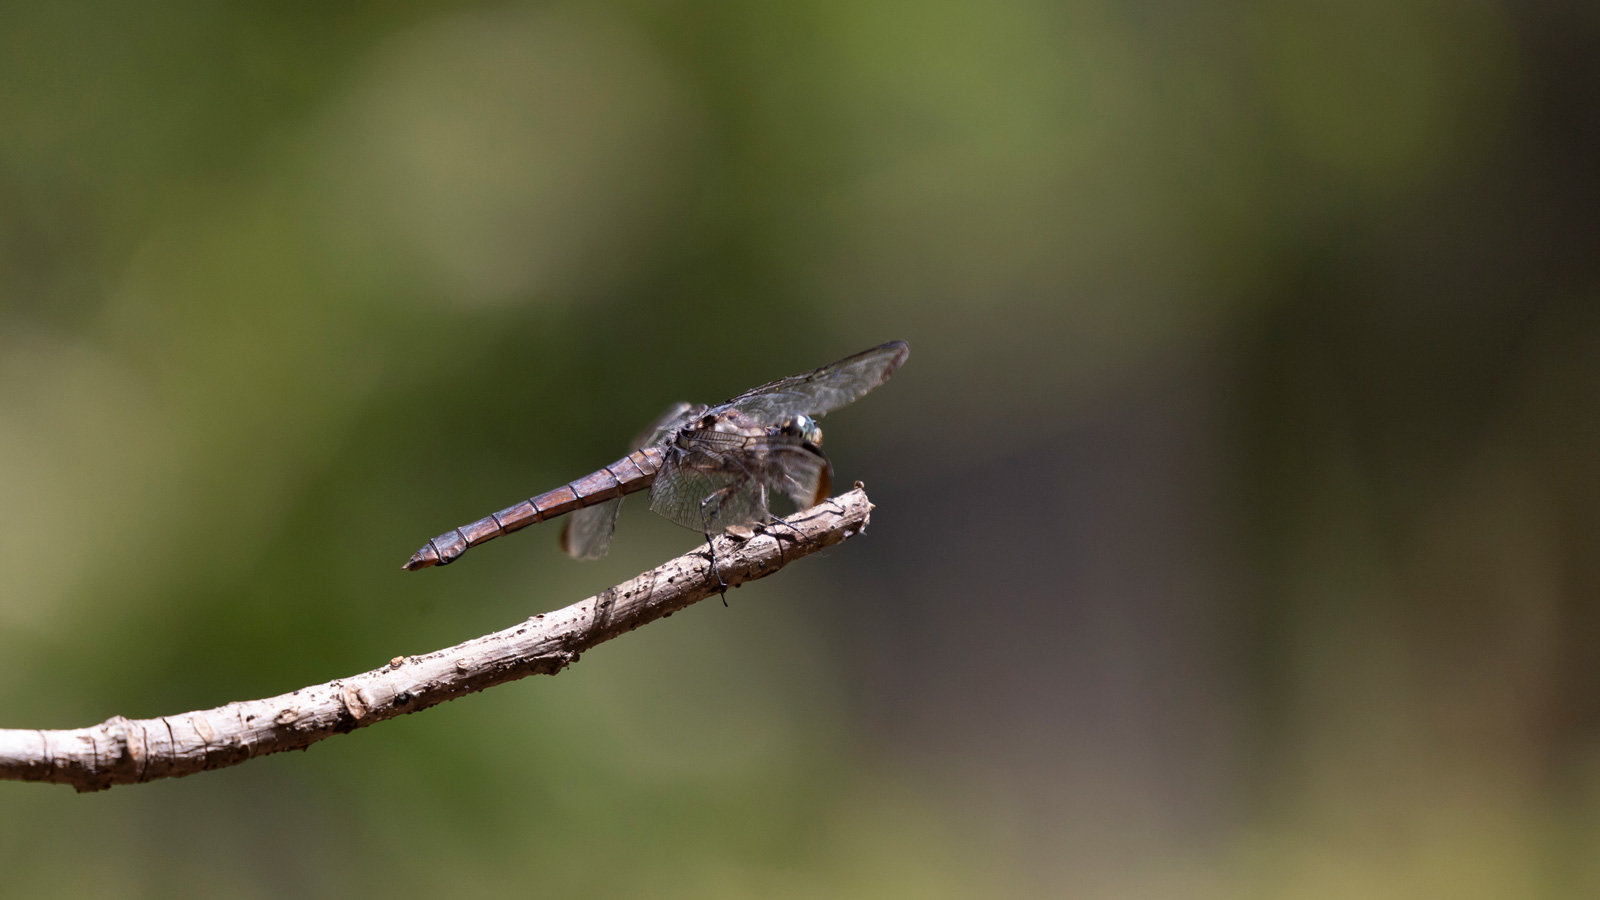 Great blue skimmer perched on a twig